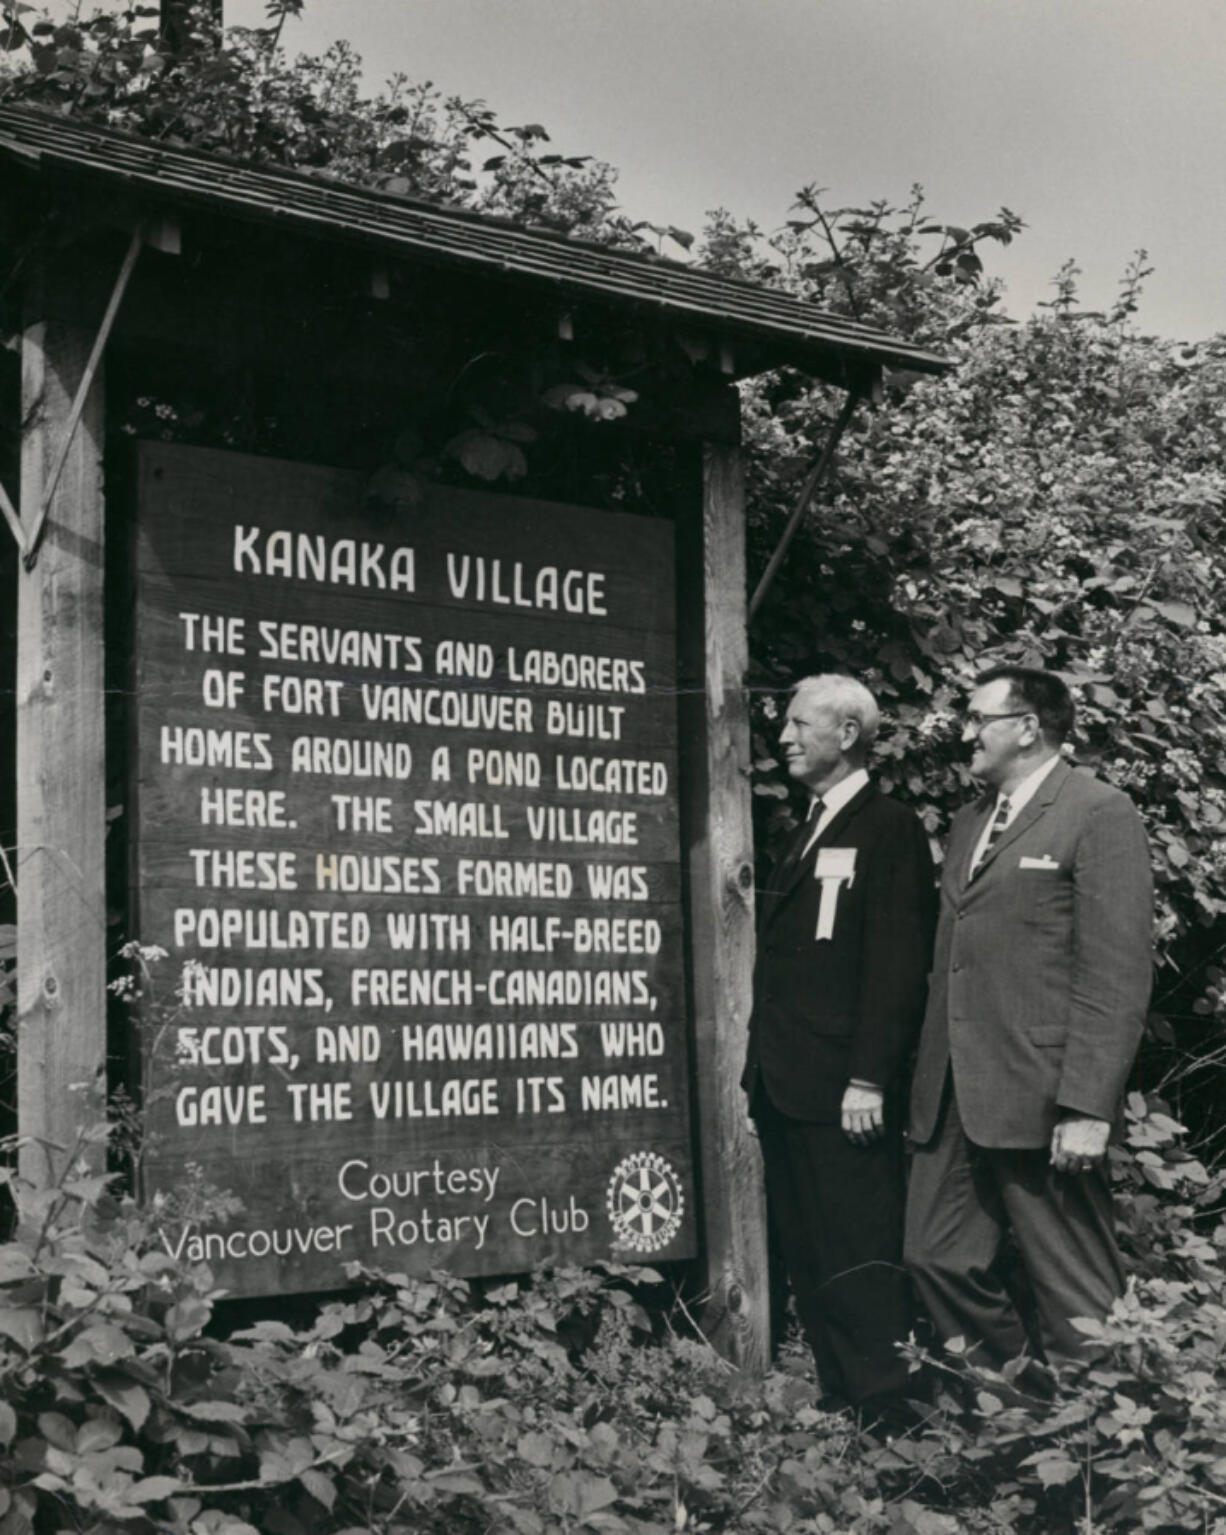 On the right, Kenneth Teter, once a Vancouver city councilman (1956-1963), stands beside an unidentified man examining an unfortunately worded sign (from today's perspective) donated by the Rotary Club describing the Hudson's Bay Company employees' village that once stood outside Fort Vancouver.